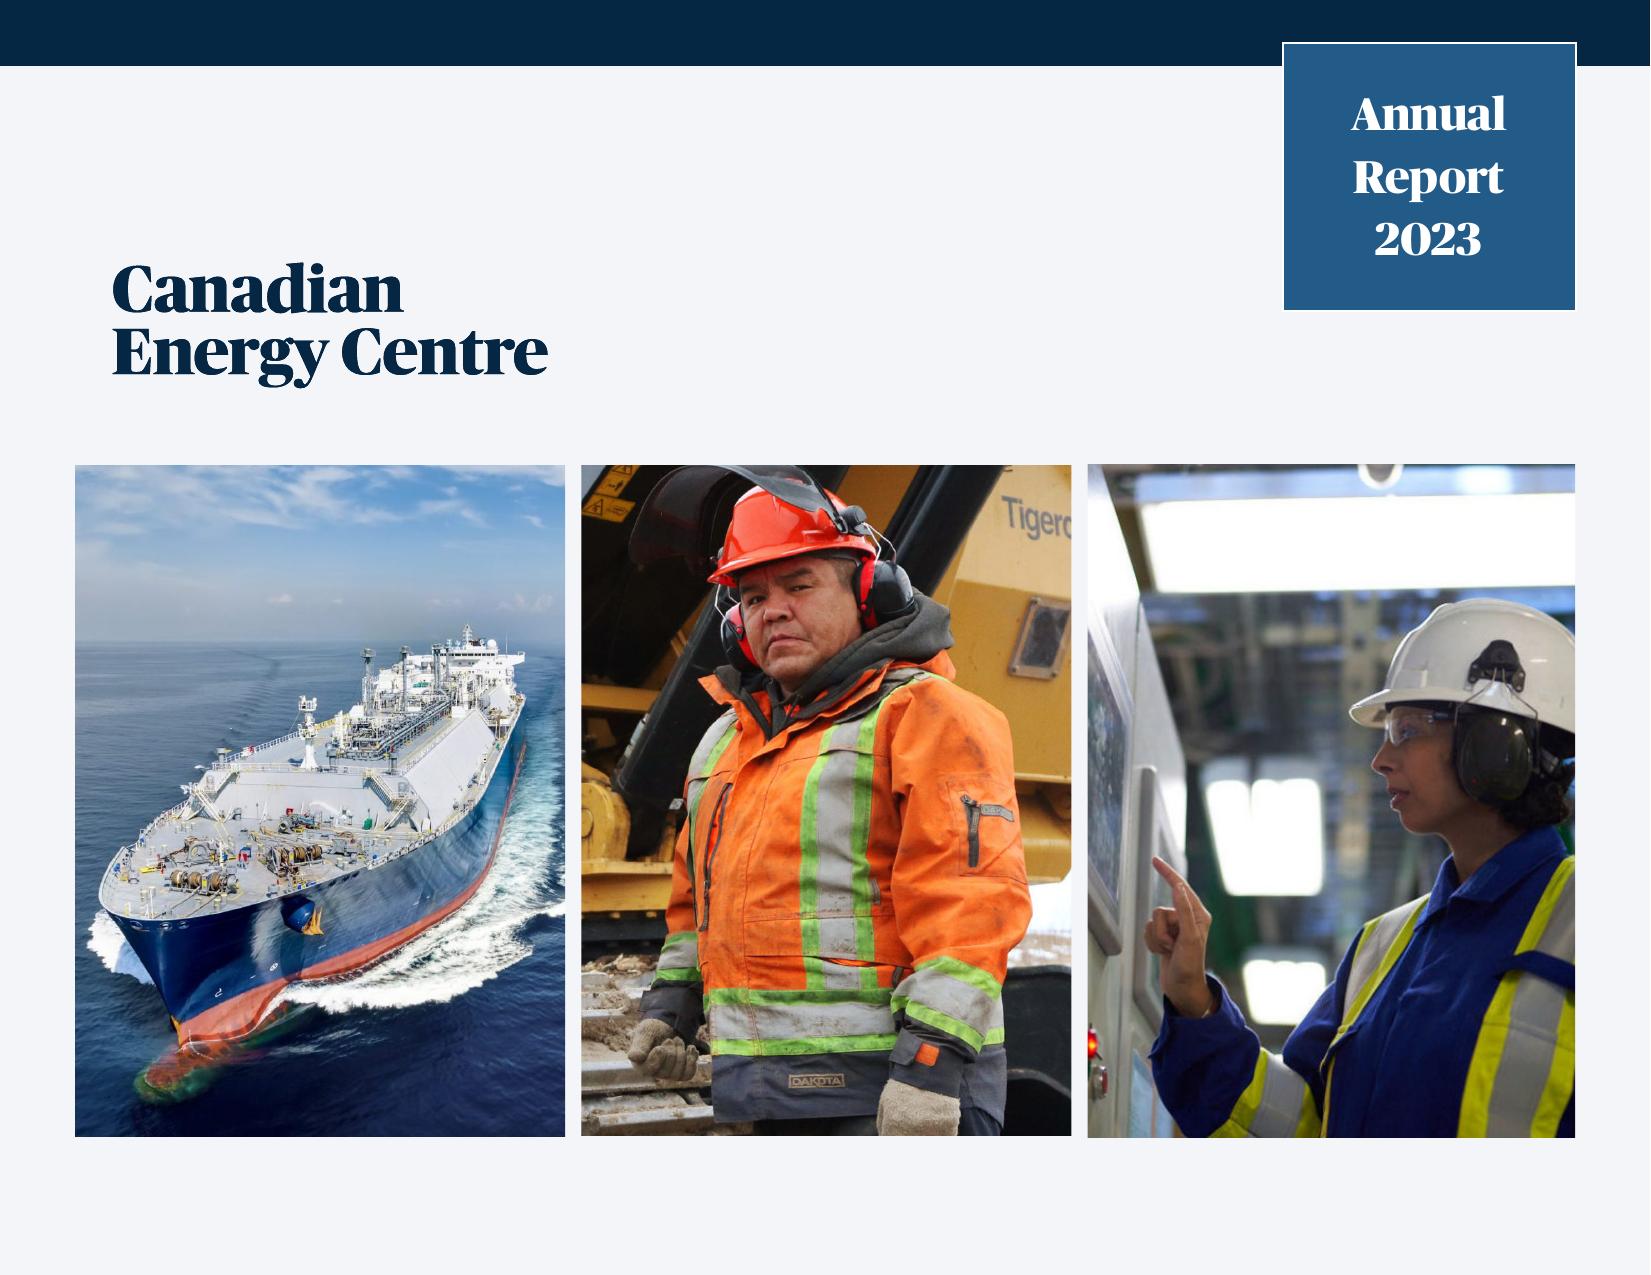 CANADIANENERGYCENTRE 2023 Annual Report